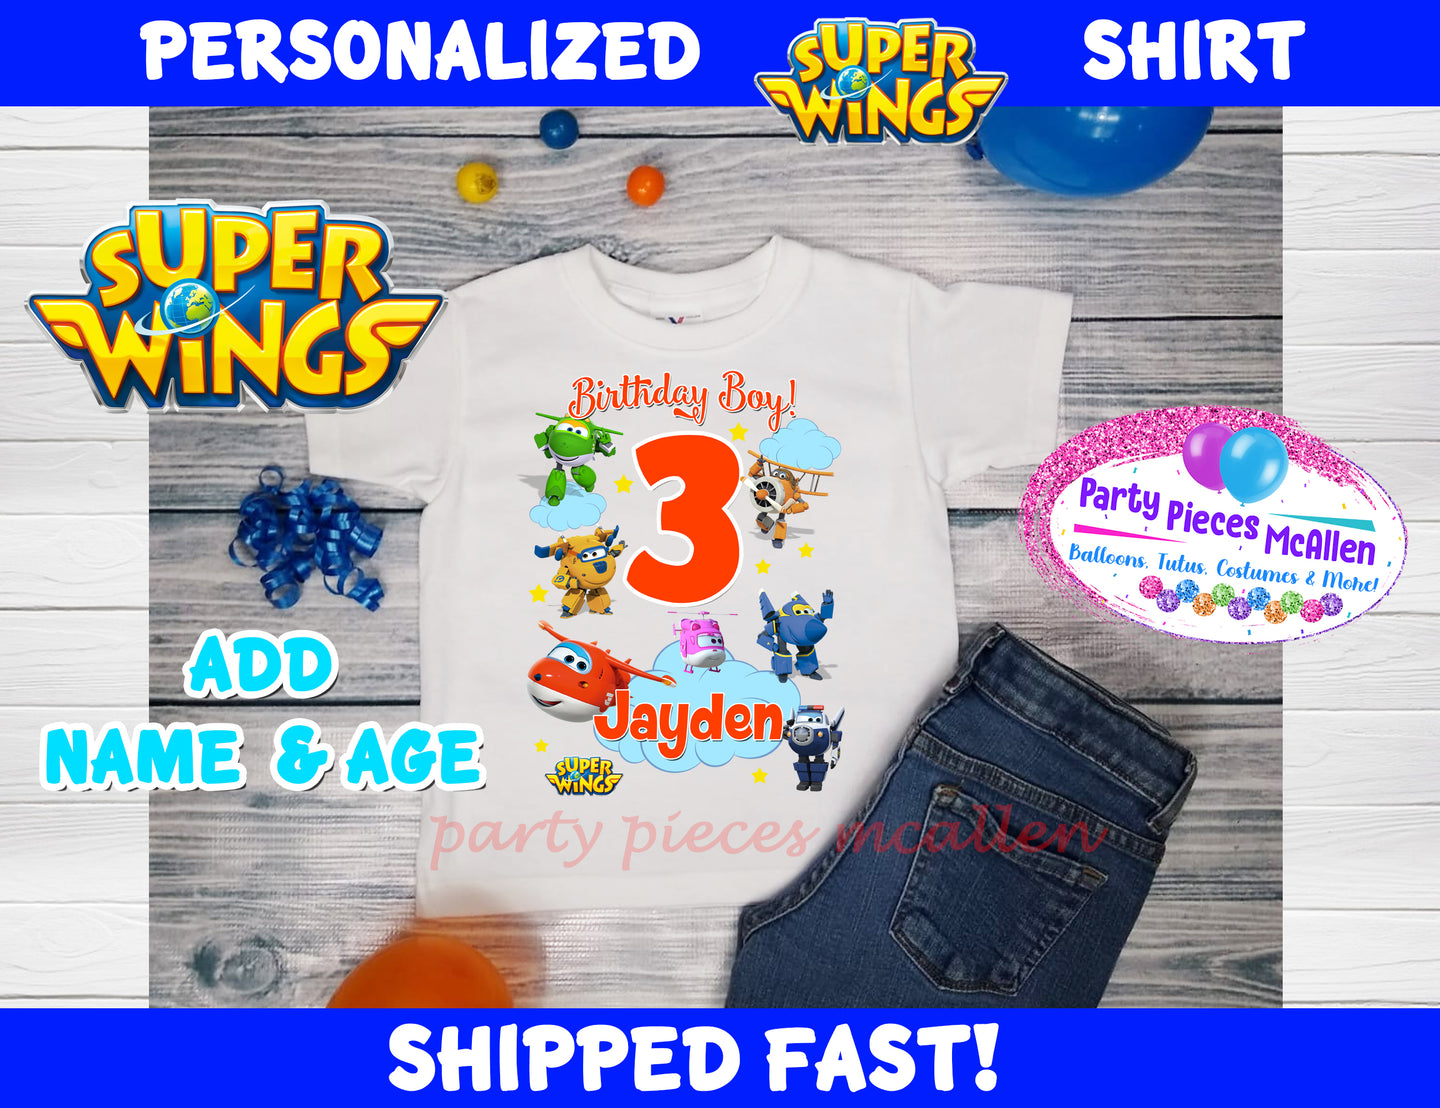 Super Wings Customized Birthday Shirt Front and back